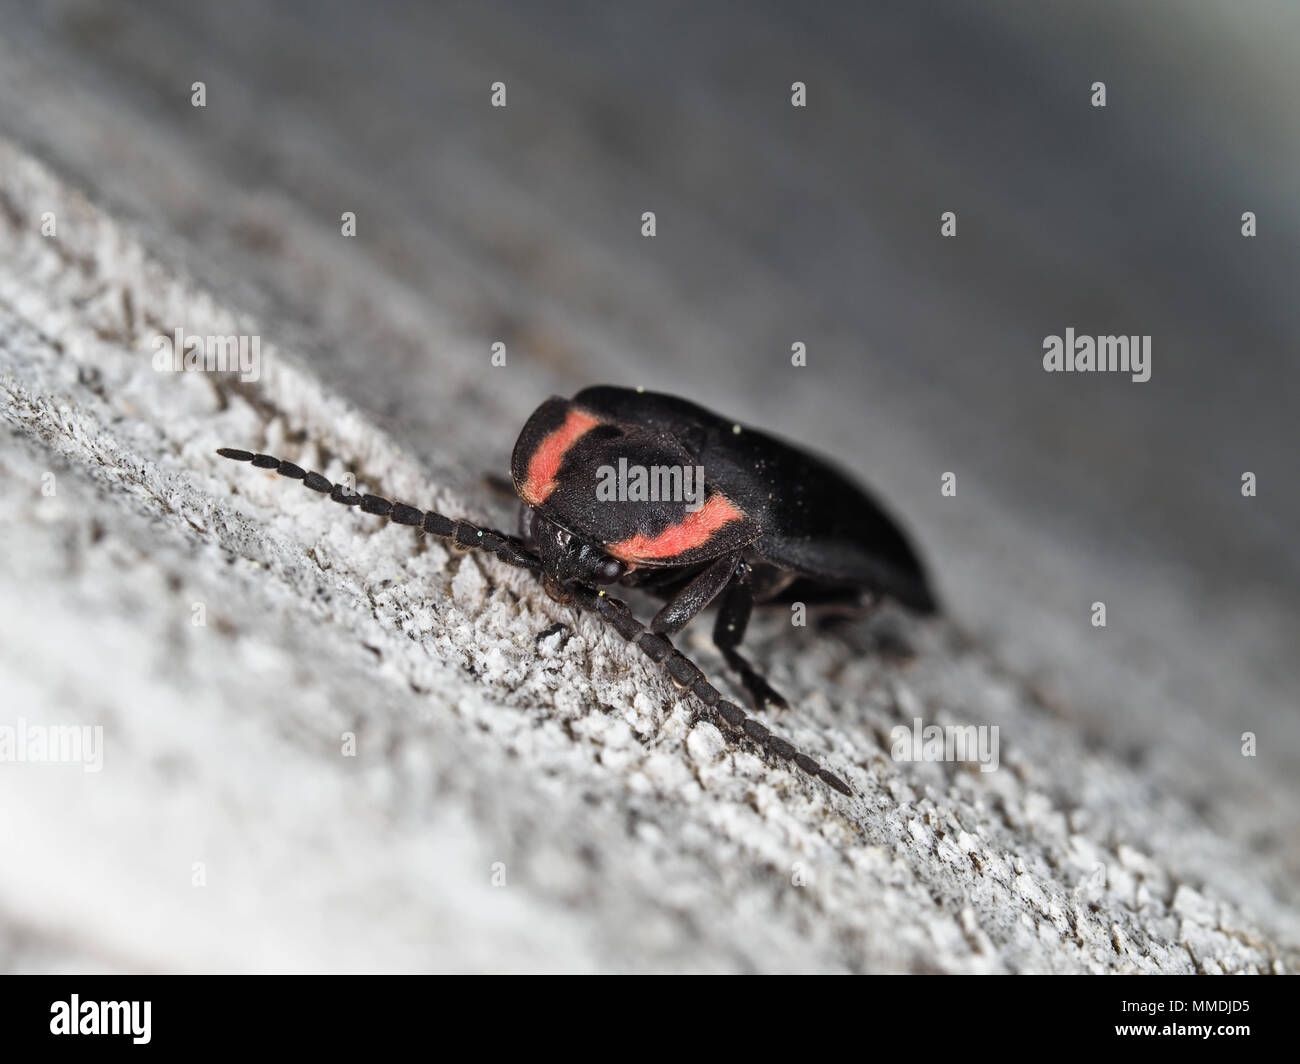 Ellychnia hatchi (diurnal firefly beetle) close-up Stock Photo